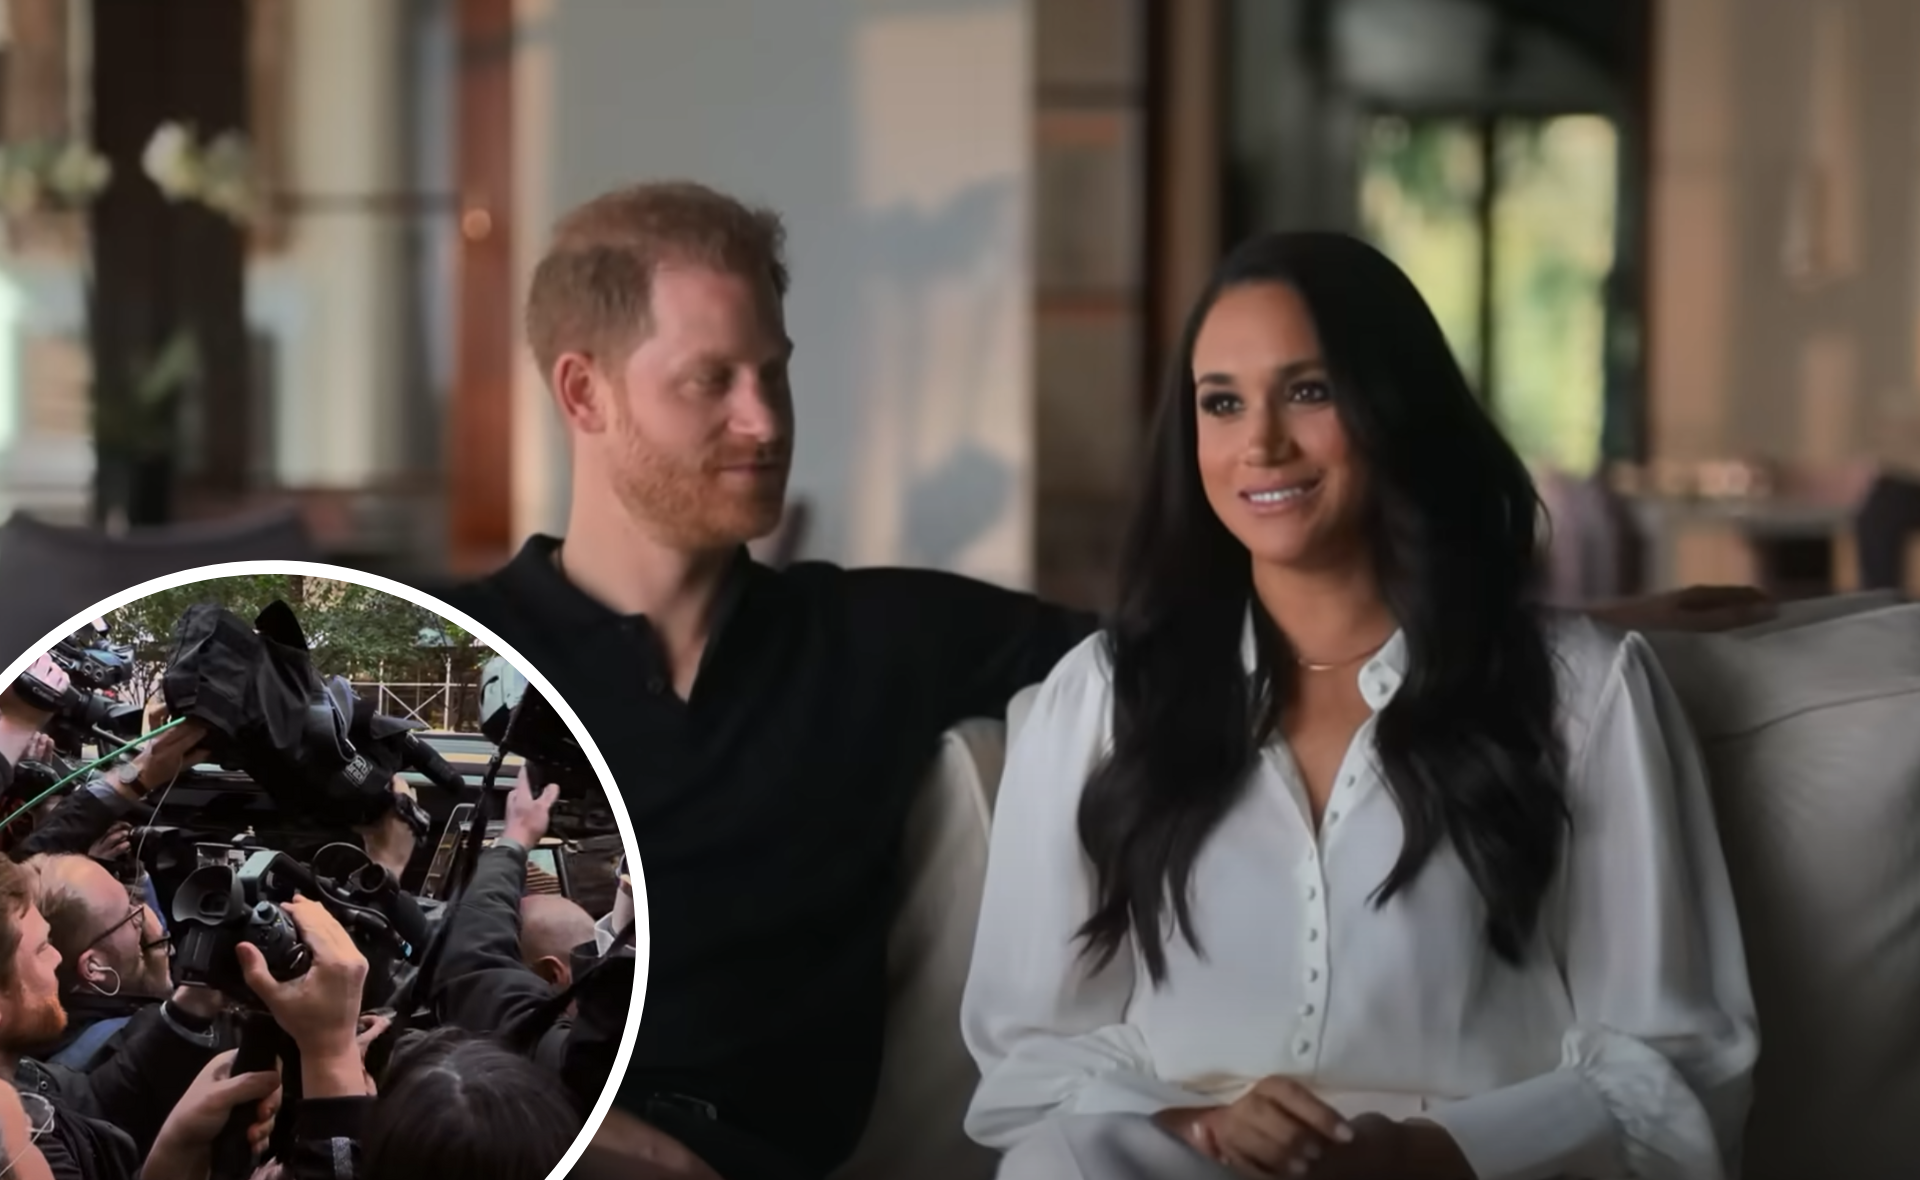 Prince Harry and Meghan Markle representatives defend ‘false’ paparazzi footage in trailer